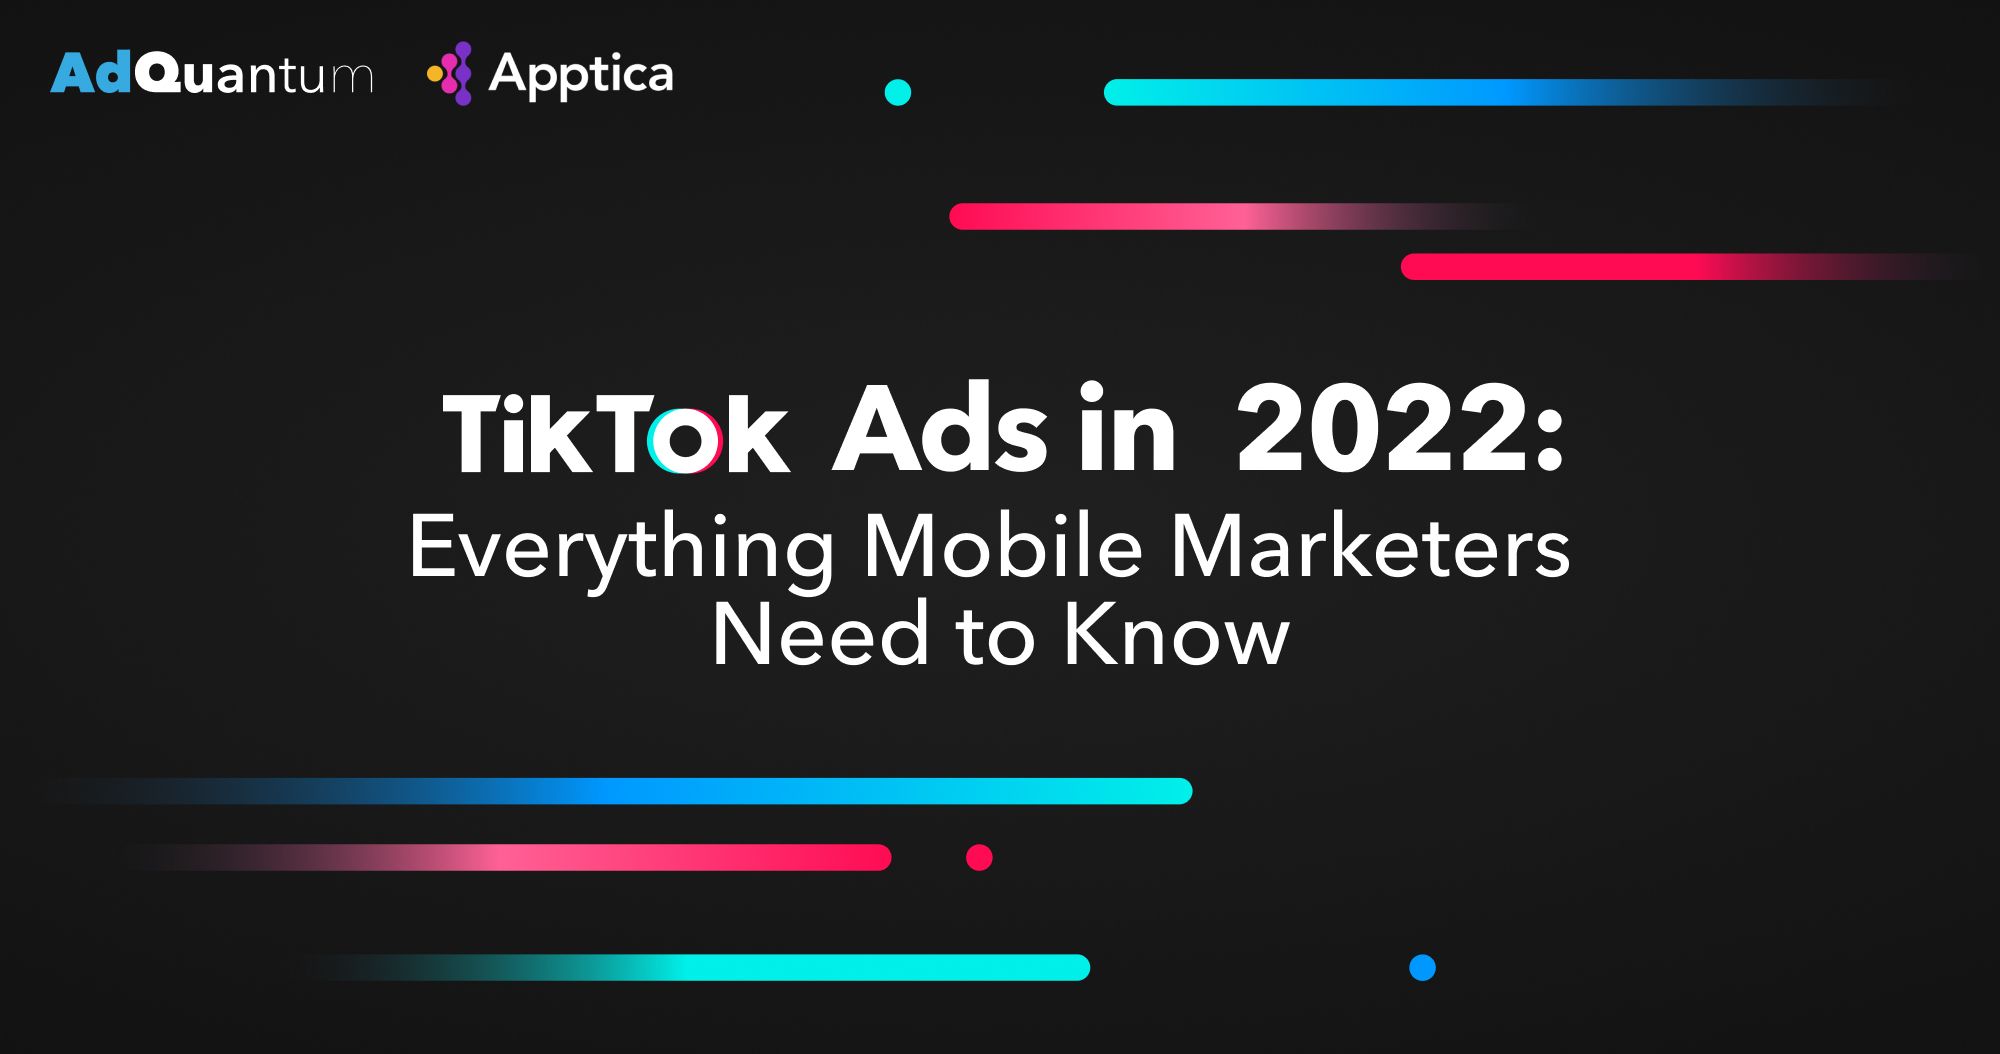 TikTok Ads in 2022: Everything Mobile Marketers Need to Know